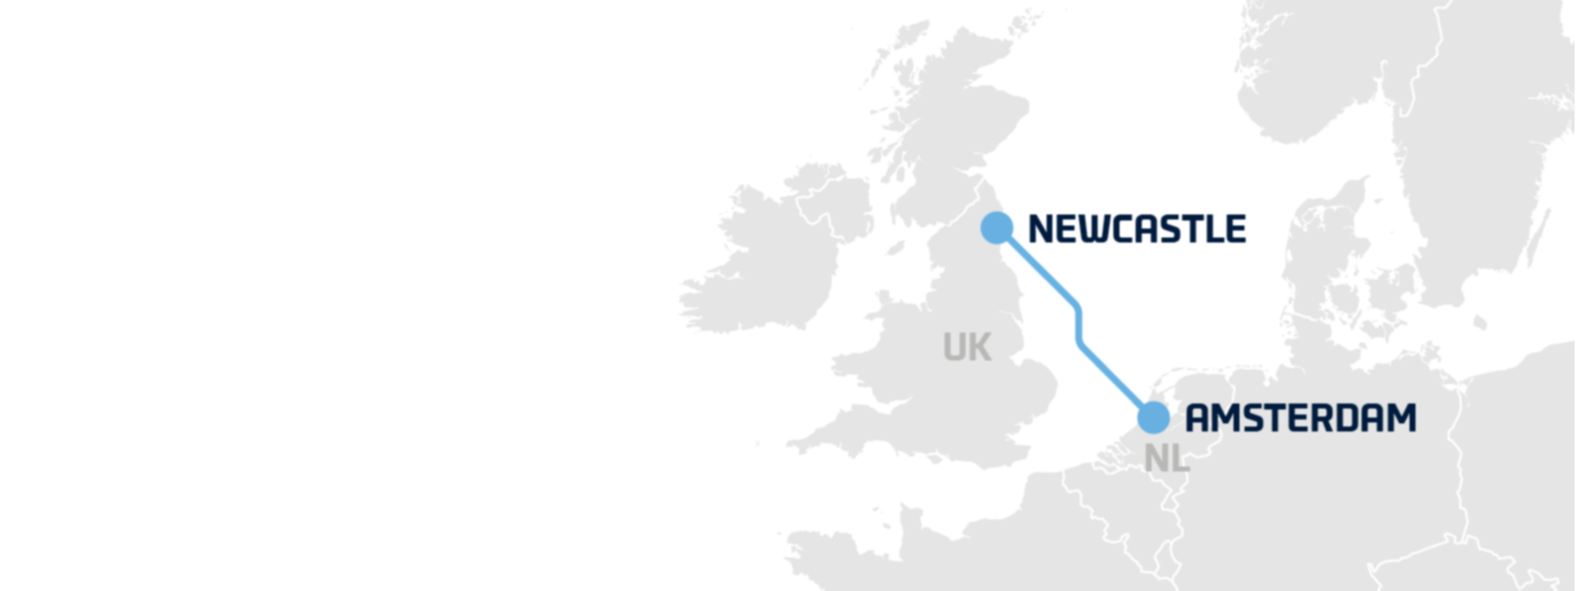 Amsterdam Newcastle freight shipping | Routes & Schedules | DFDS (INT)